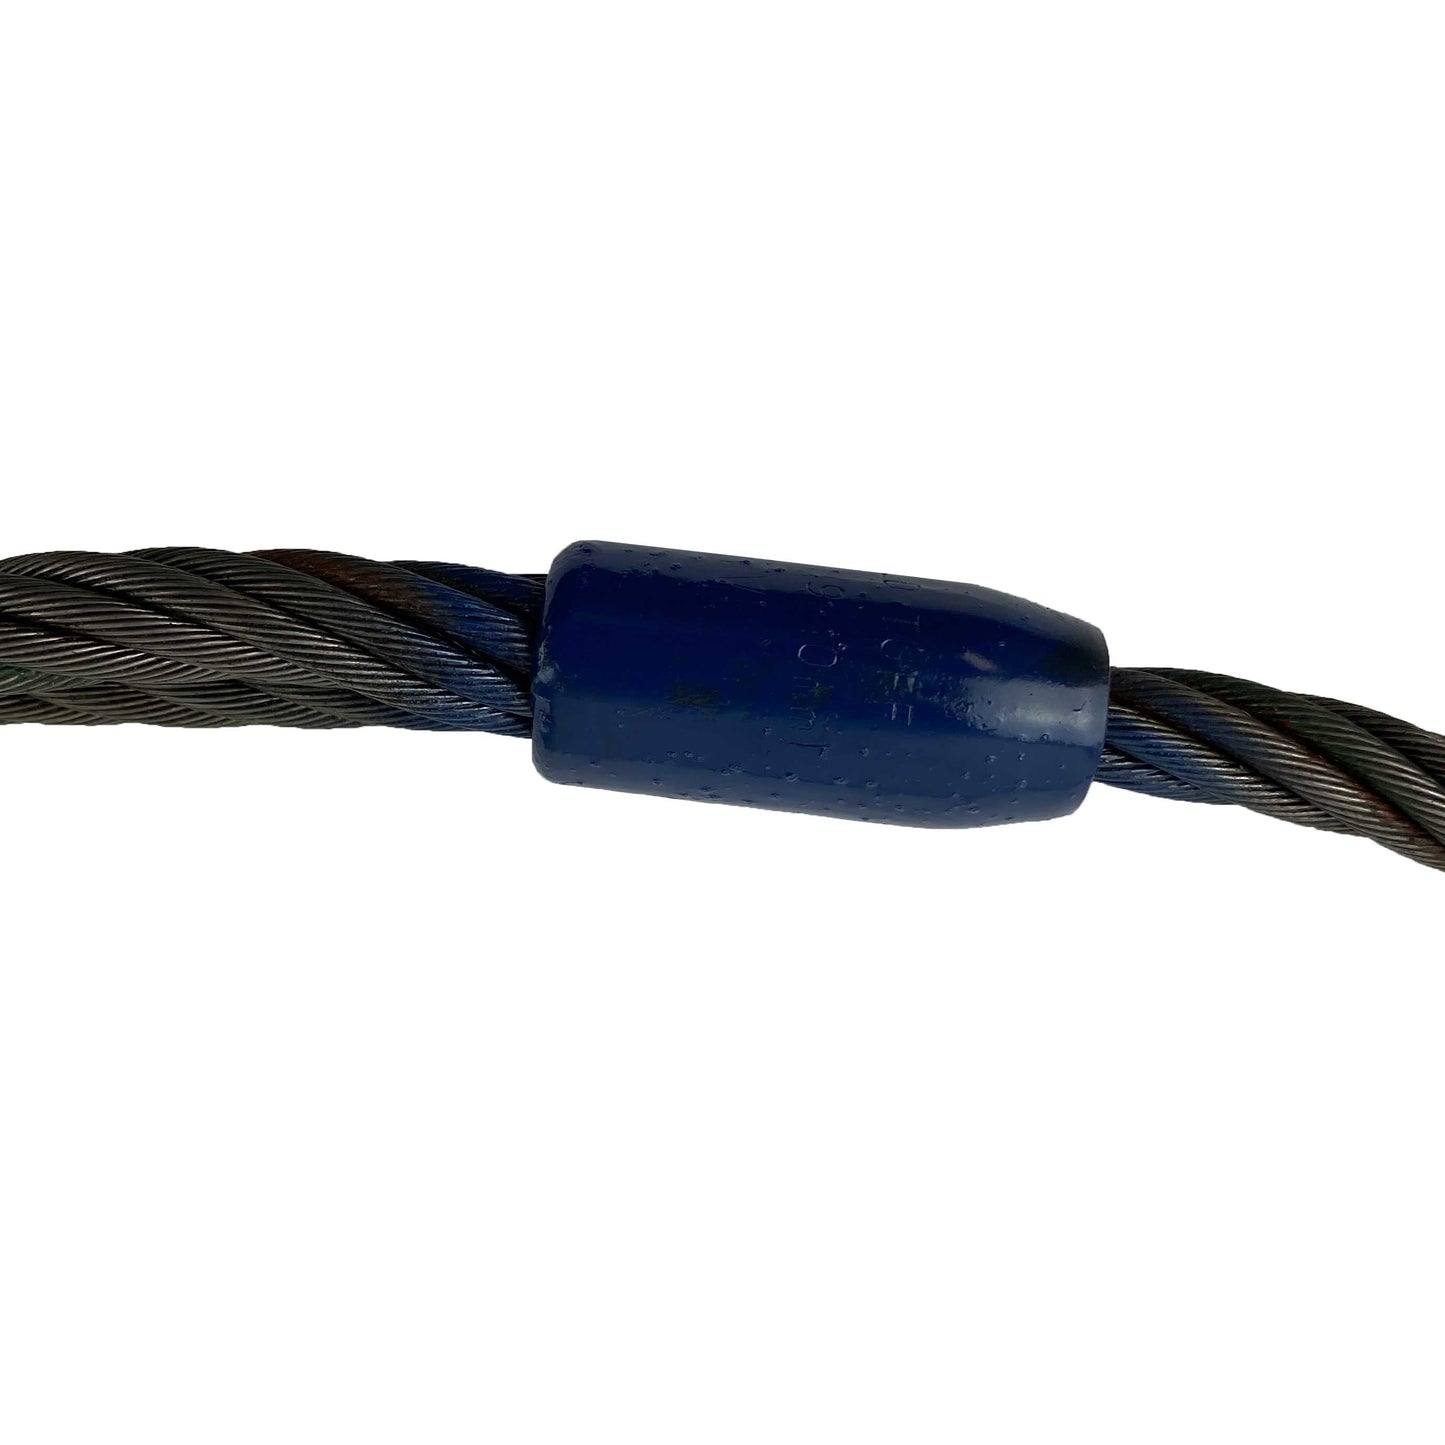 138 inch x 8 foot Mechanical Splice Grommet Wire Rope Sling image 4 of 4